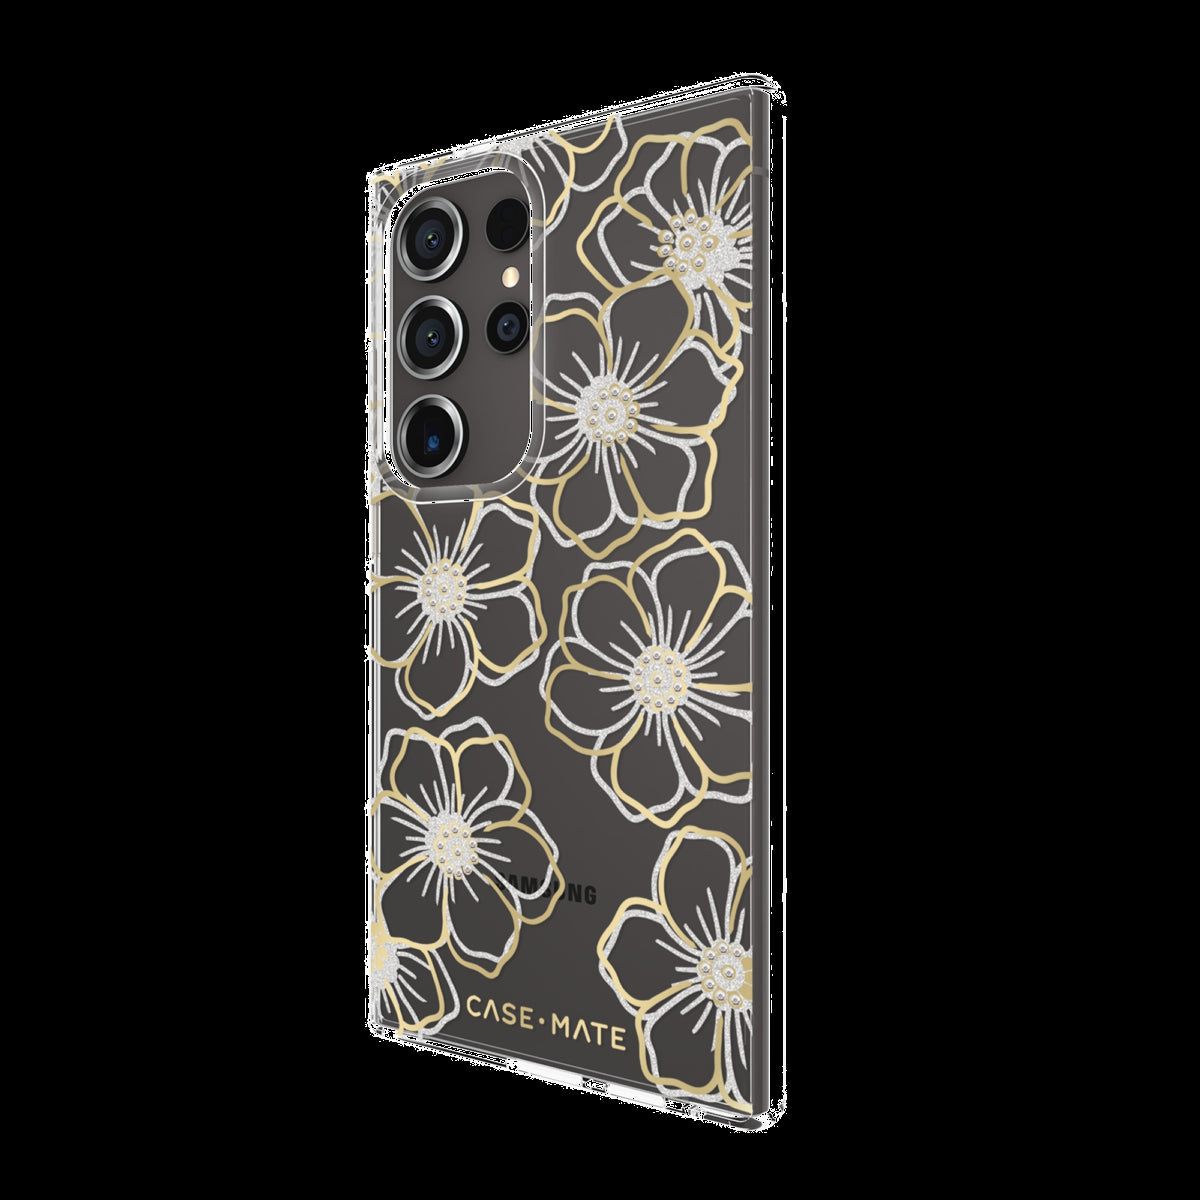 <p>The Case-Mate Floral Gems case features an eye-catching metallic foil floral design paired with recessed gemstones which beautifully compliments your device.</p>